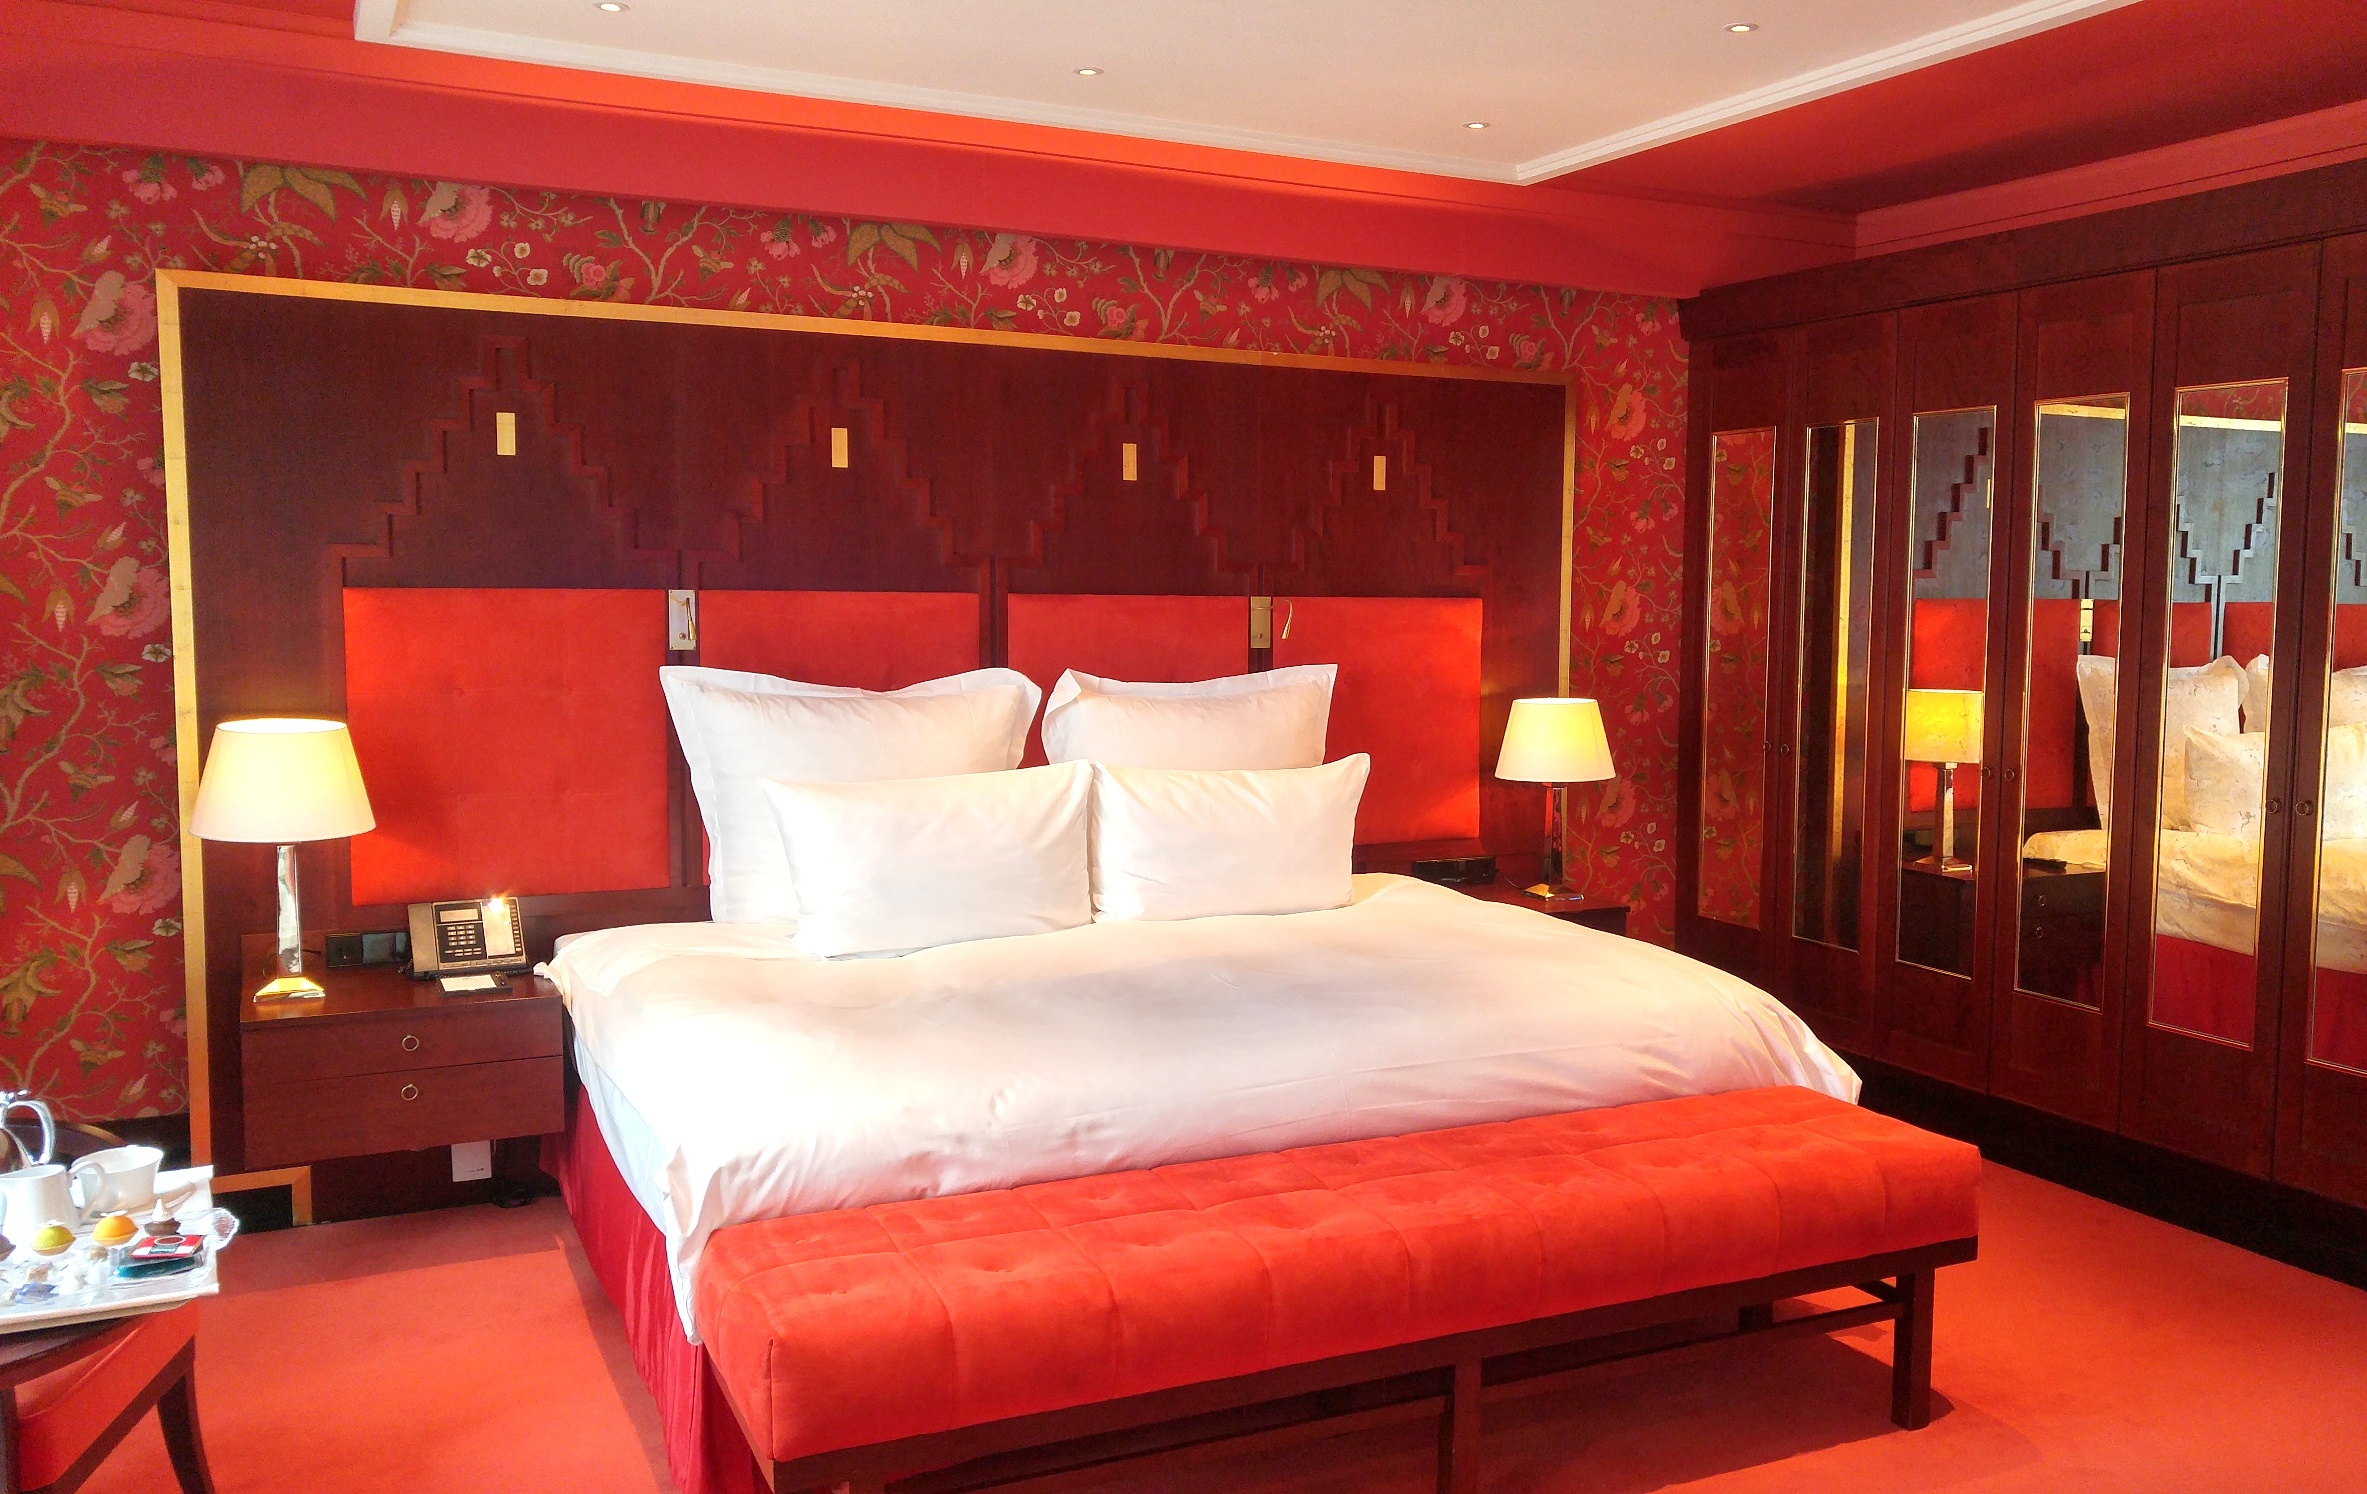 Kingsize bed in Junior Suite at De L'Europe Amsterdam by night